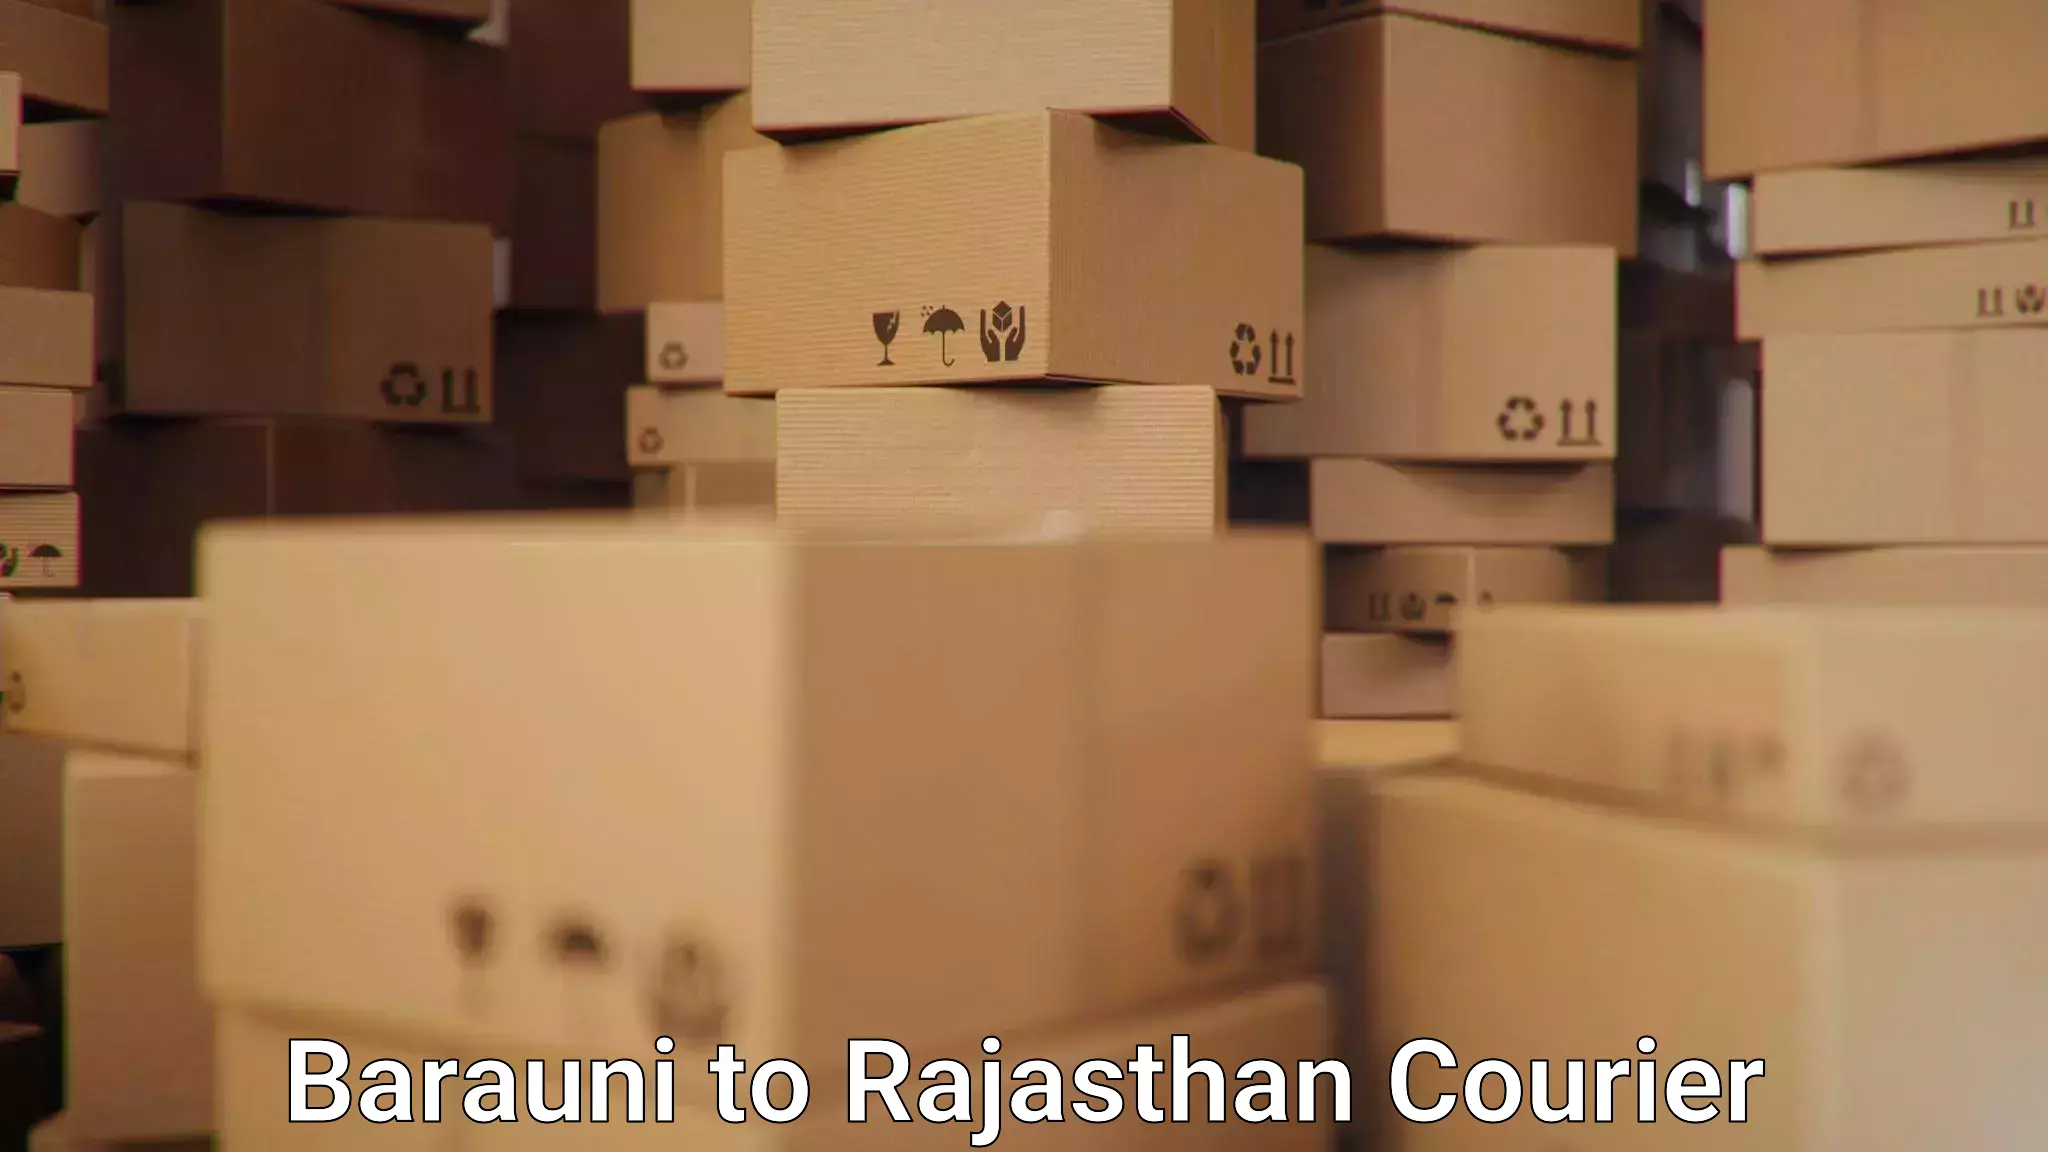 Courier app Barauni to Srimadhopur